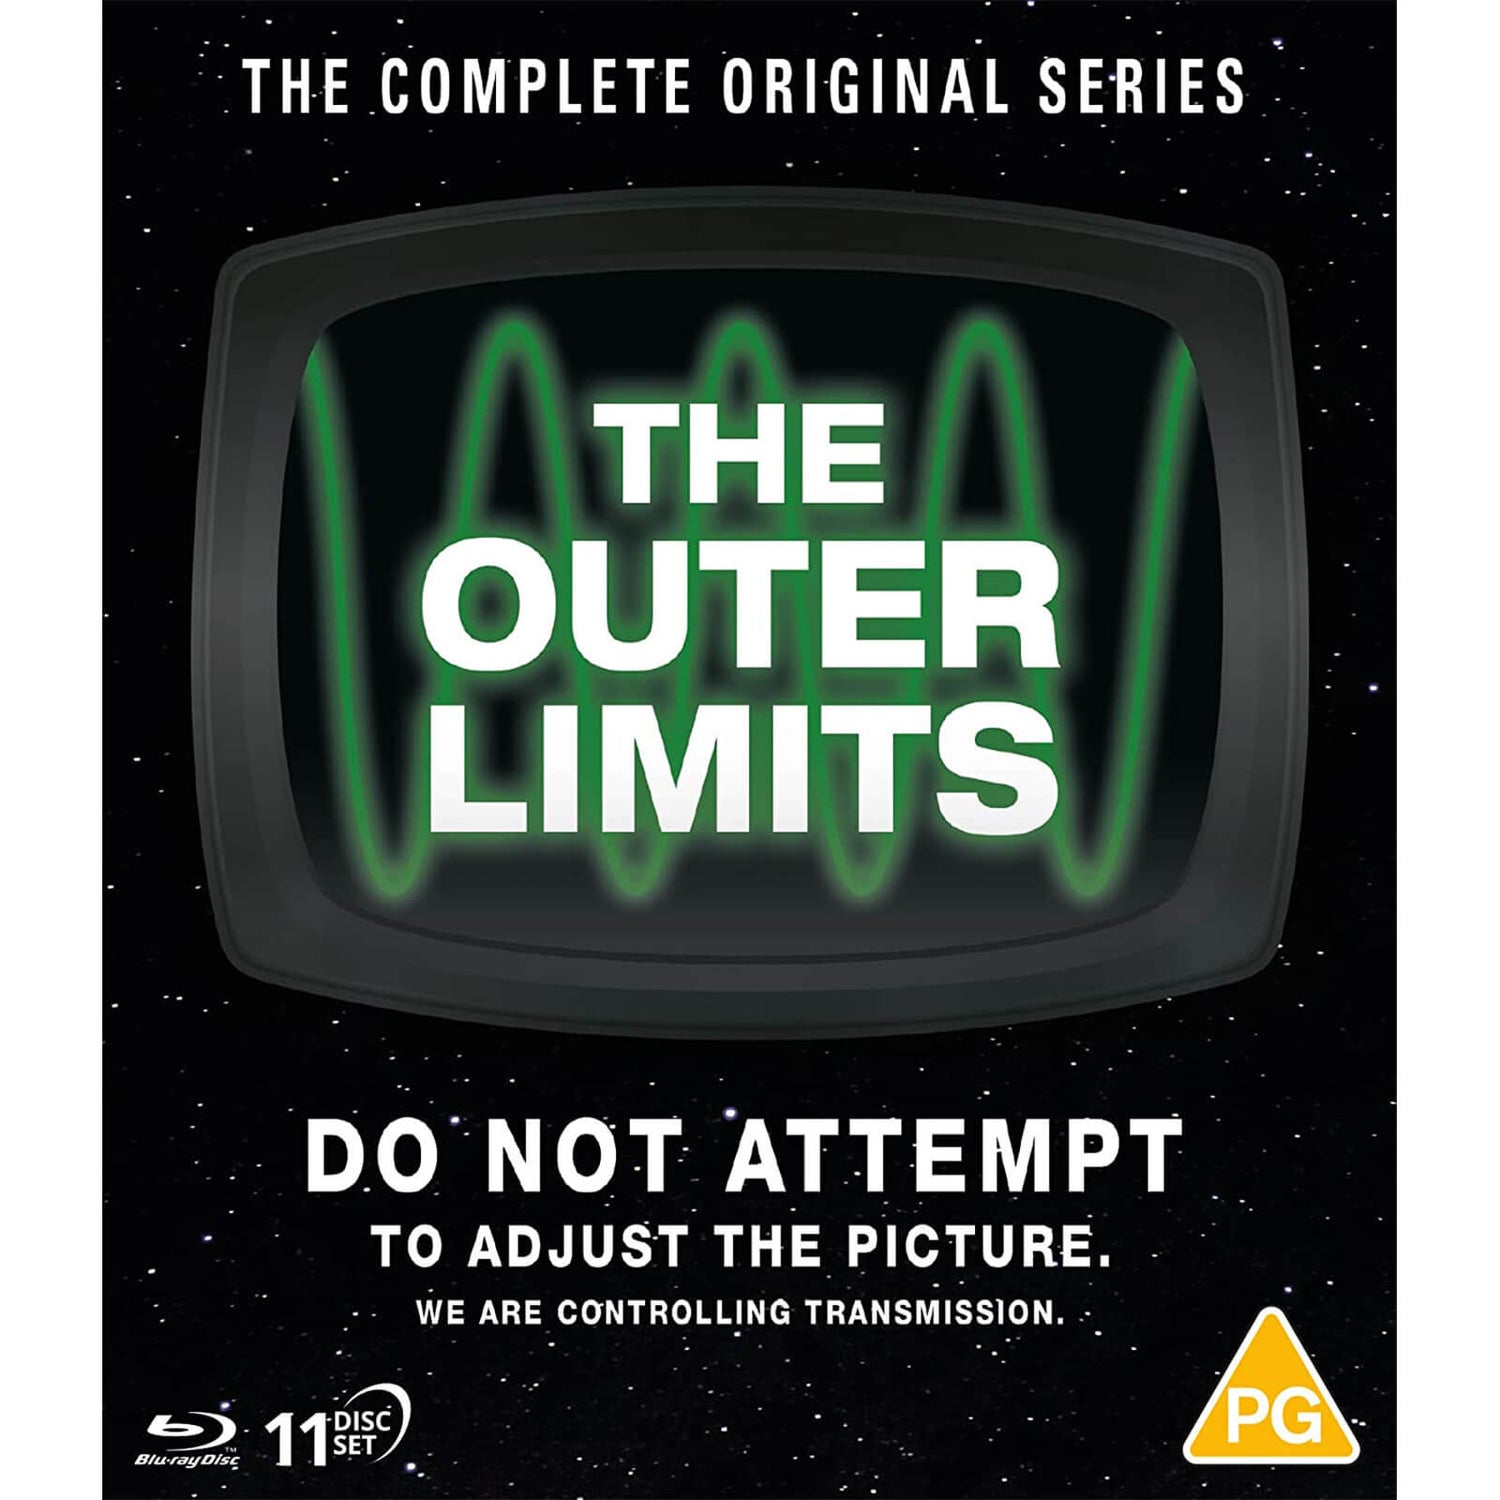 The Outer Limits (Original Series)